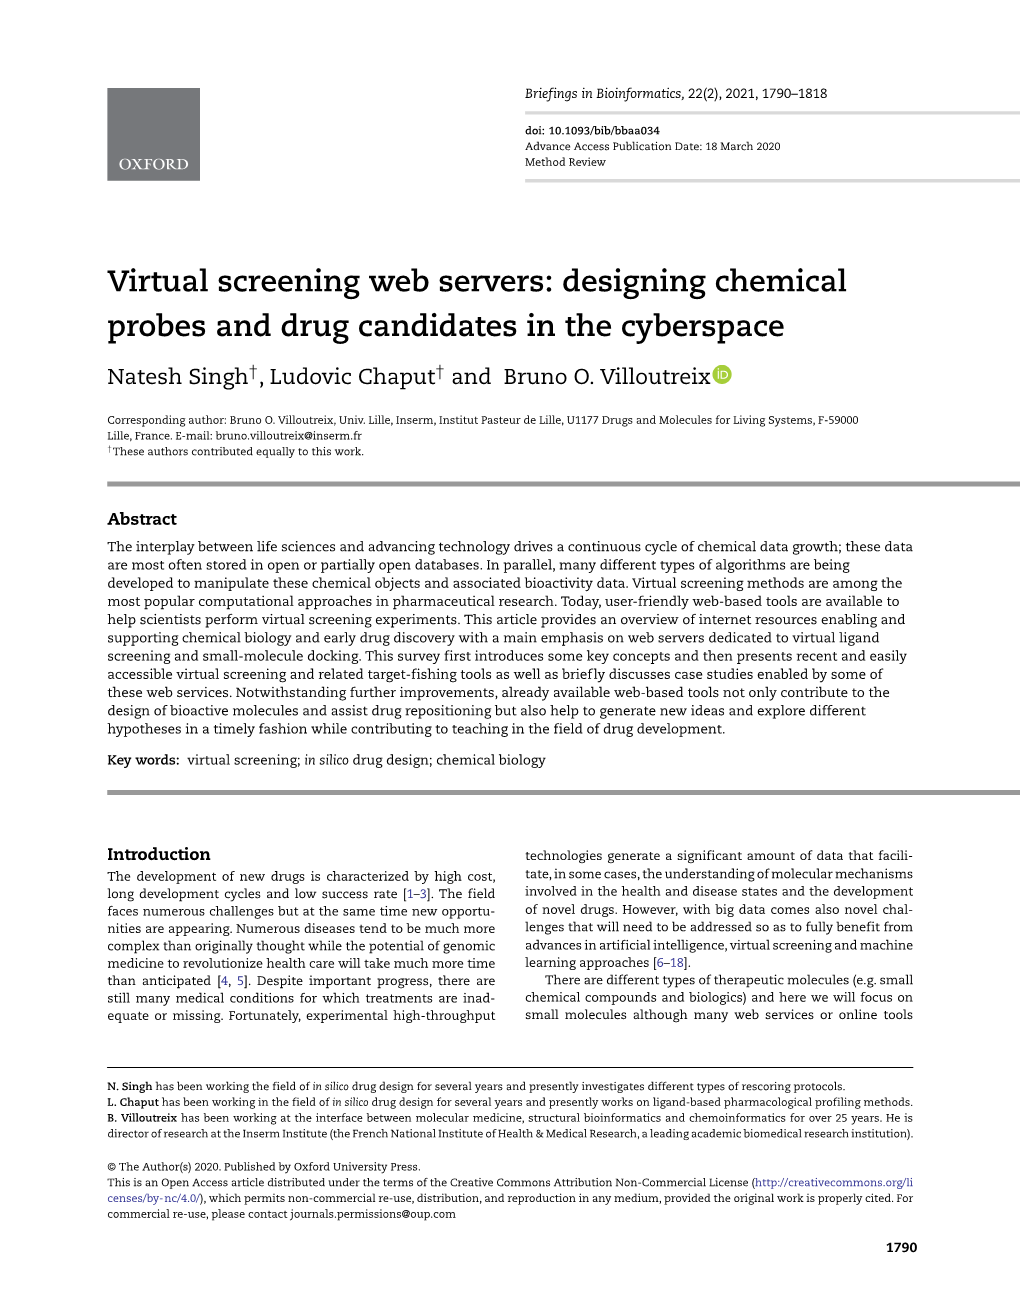 Virtual Screening Web Servers: Designing Chemical Probes and Drug Candidates in the Cyberspace